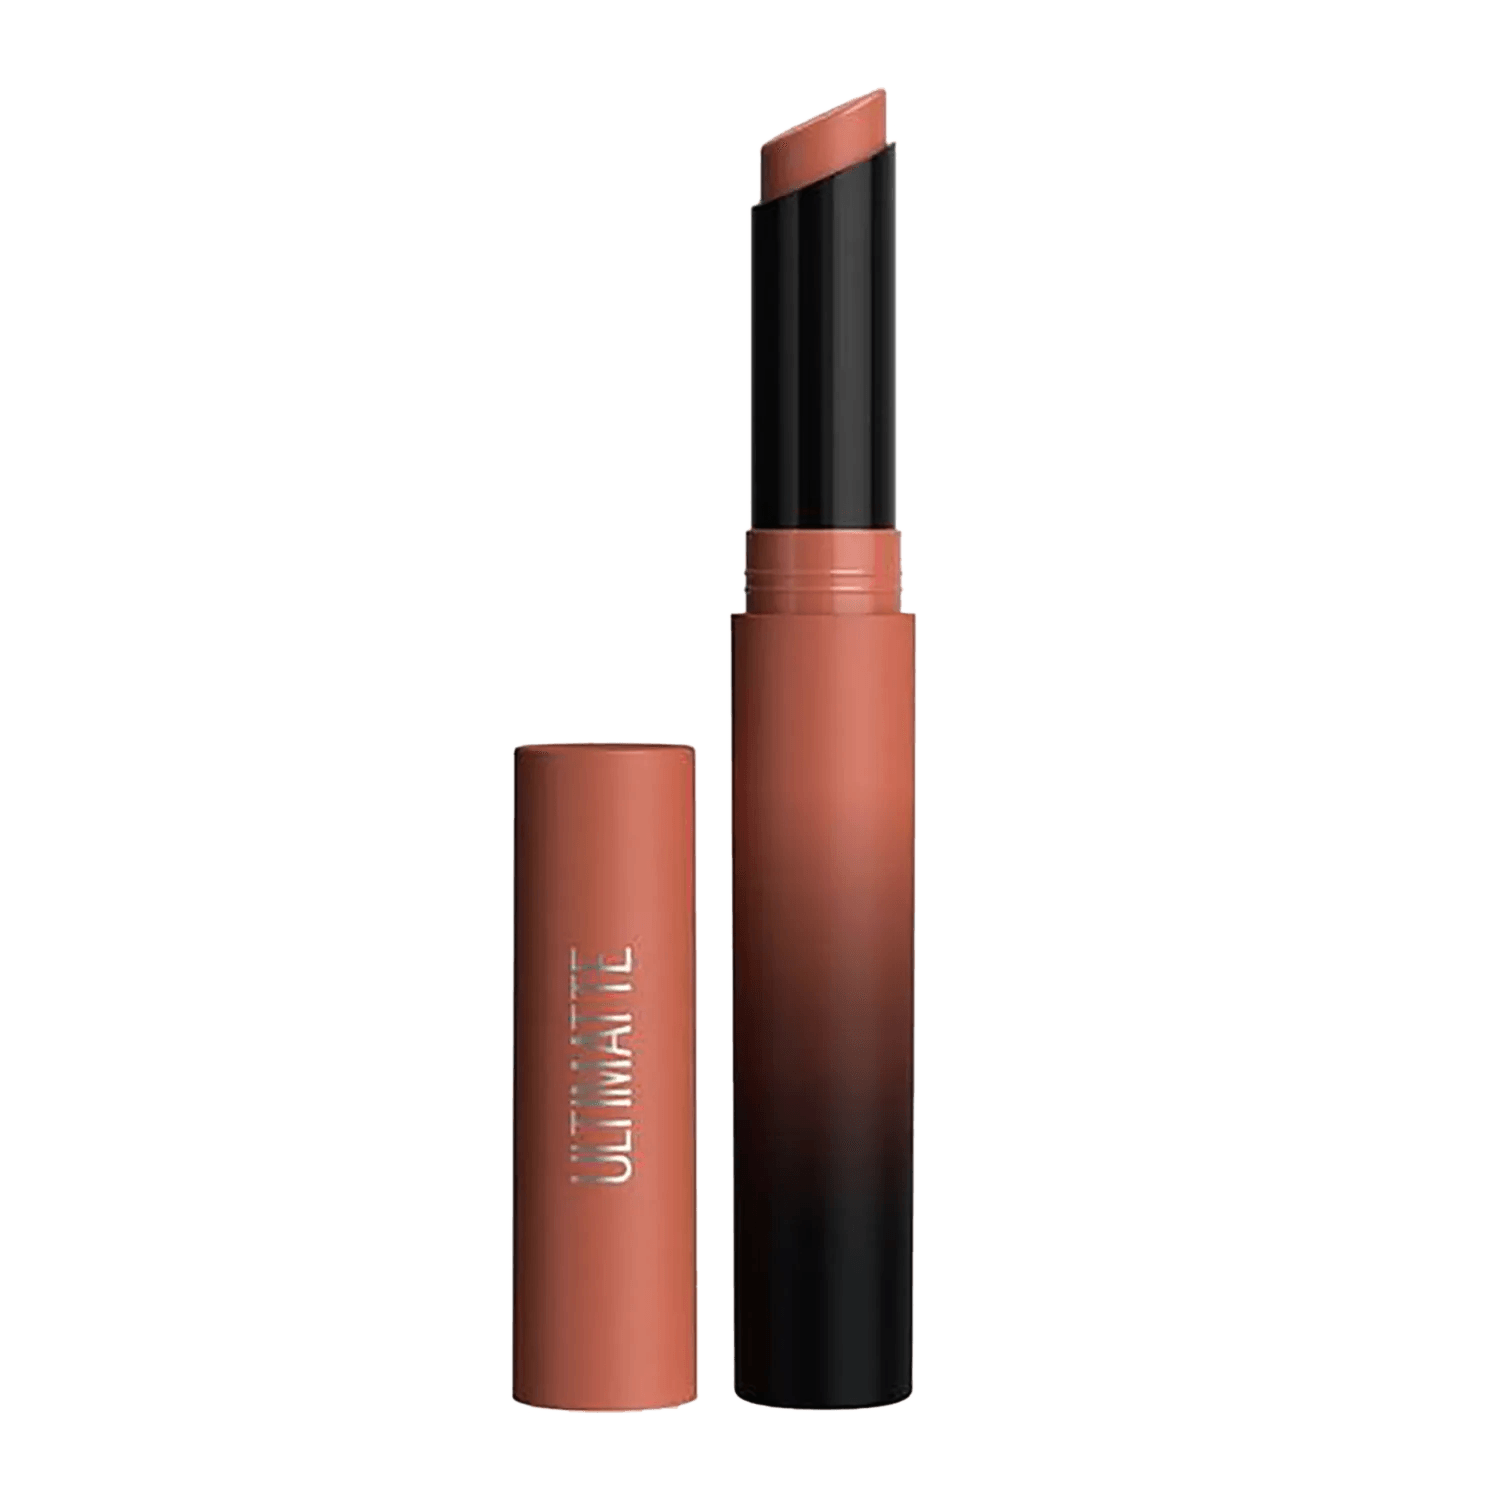 Maybelline New York | Maybelline New York Color Sensational Ultimattes Lipstick - More Taupe (1.7g)